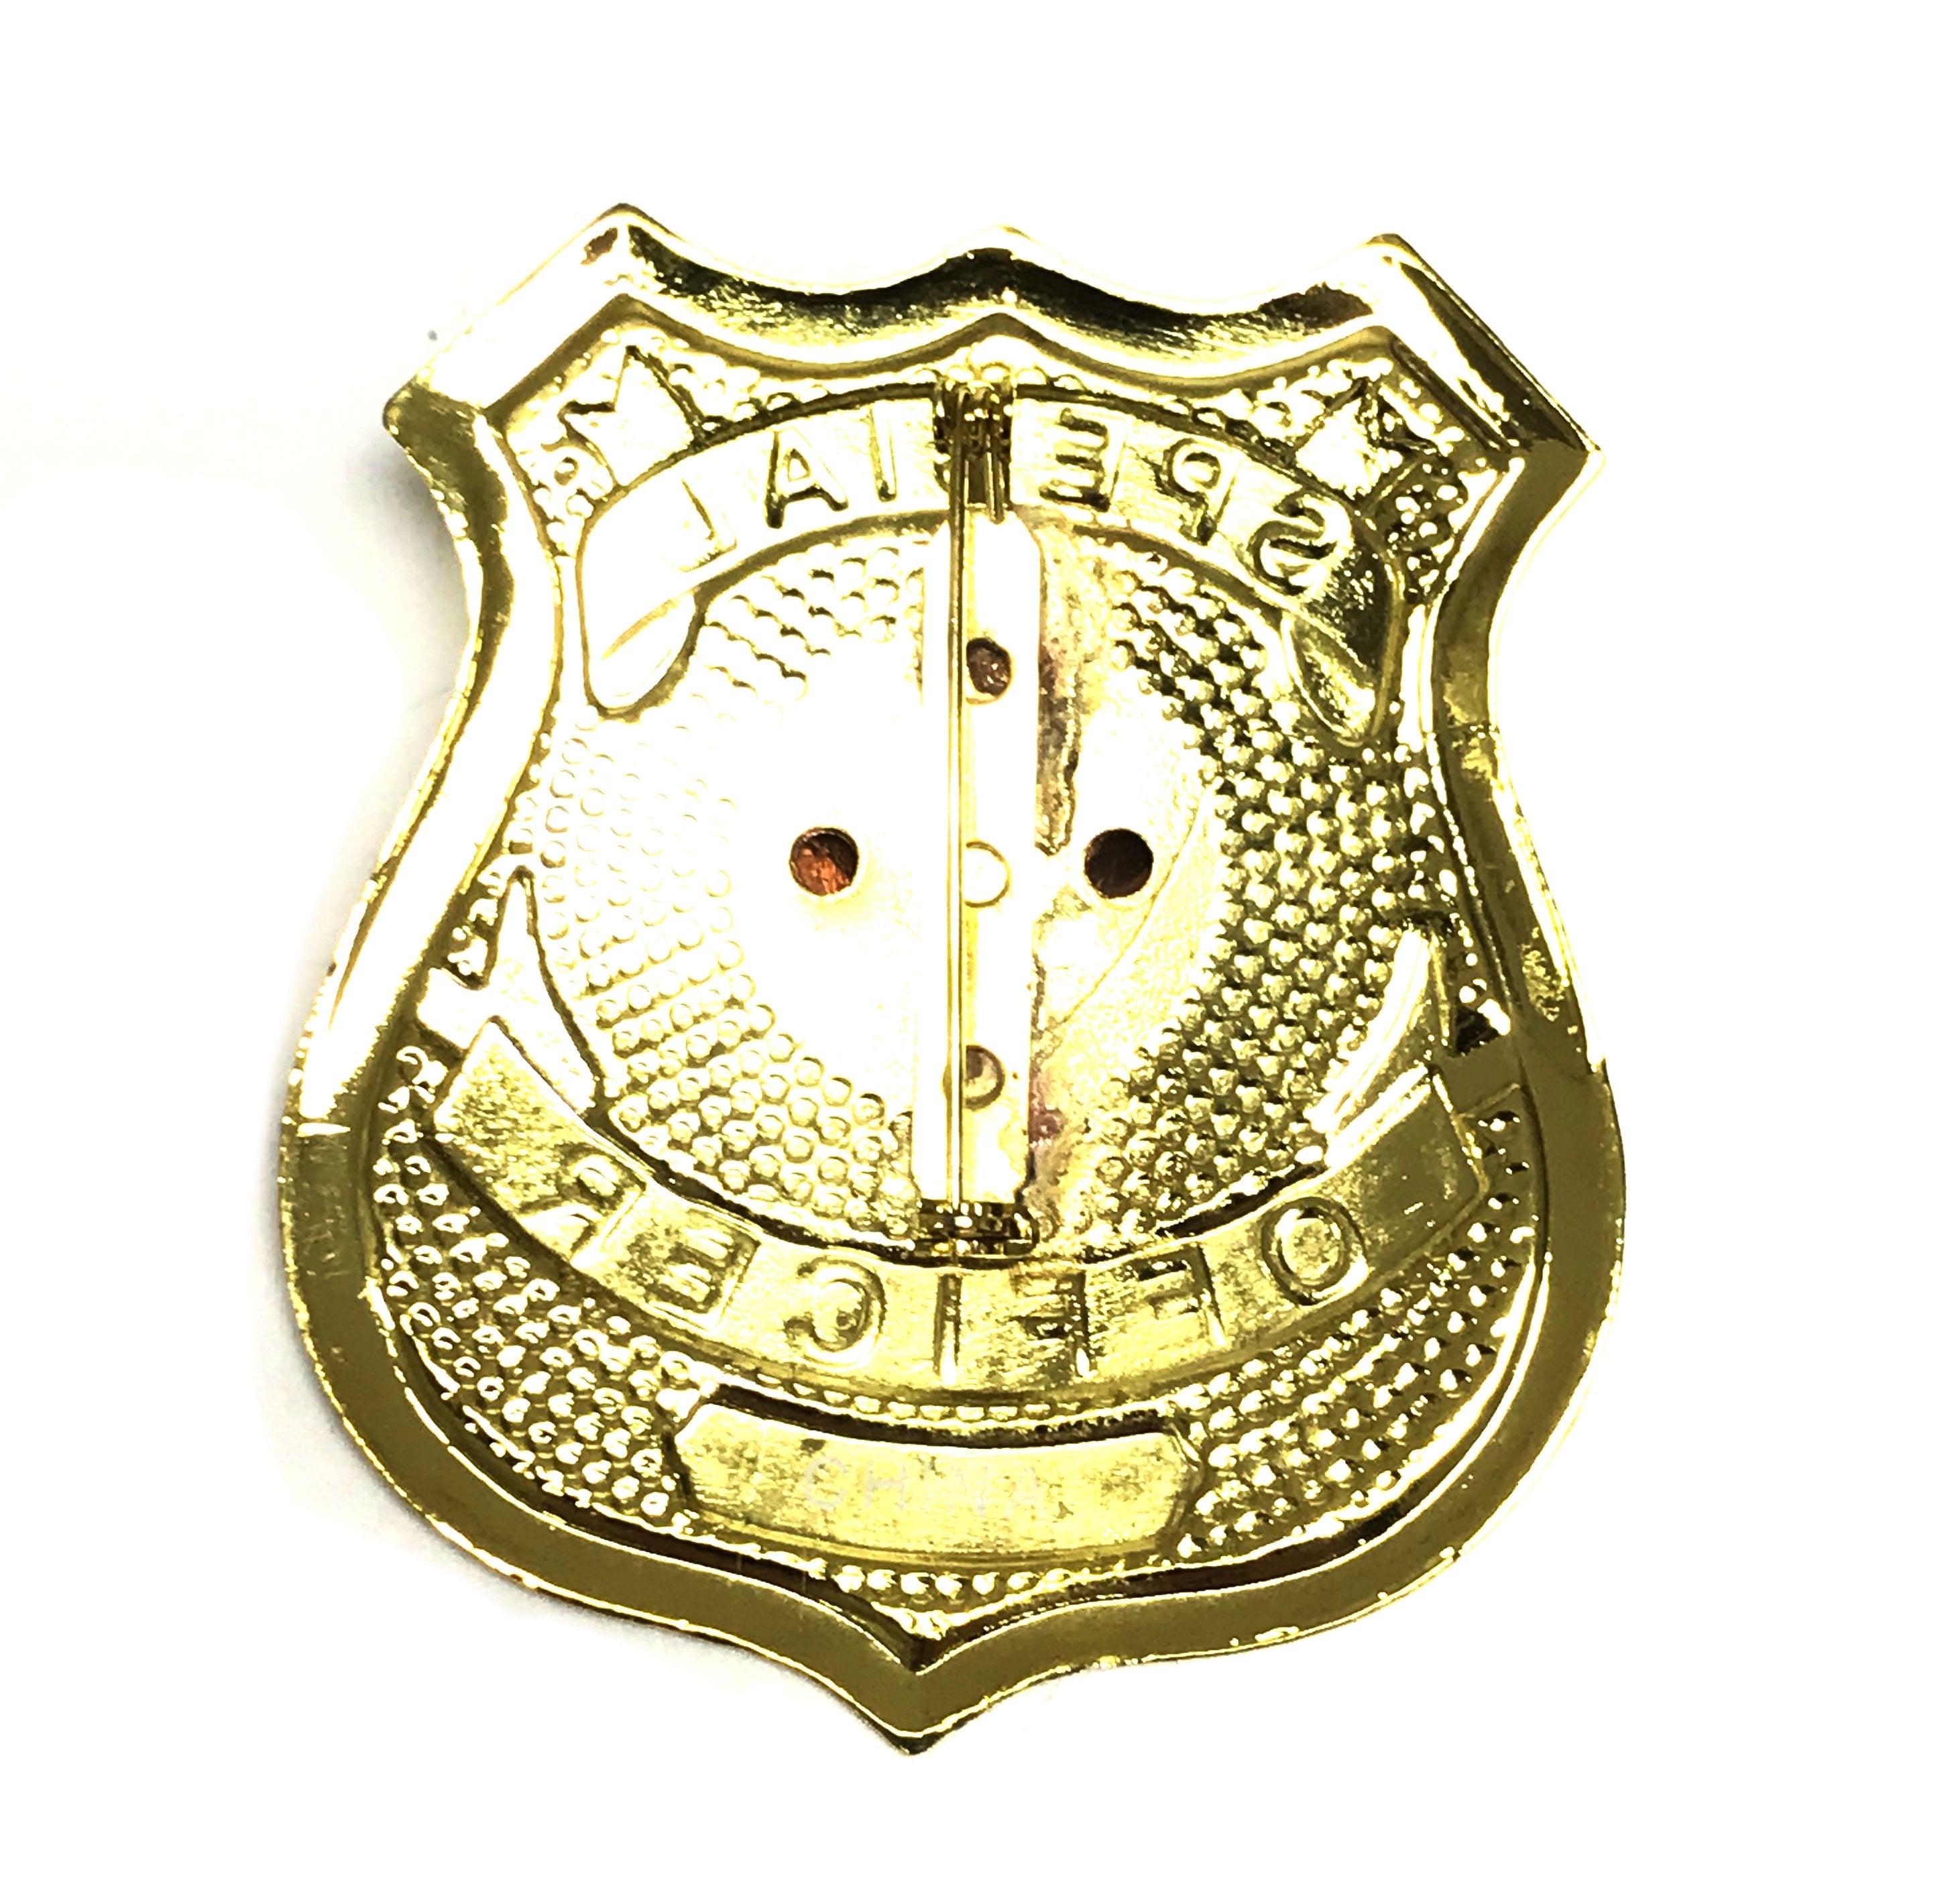 Metal Special Officer Police Style Badge Prop with Pin Back Closure - GOLD